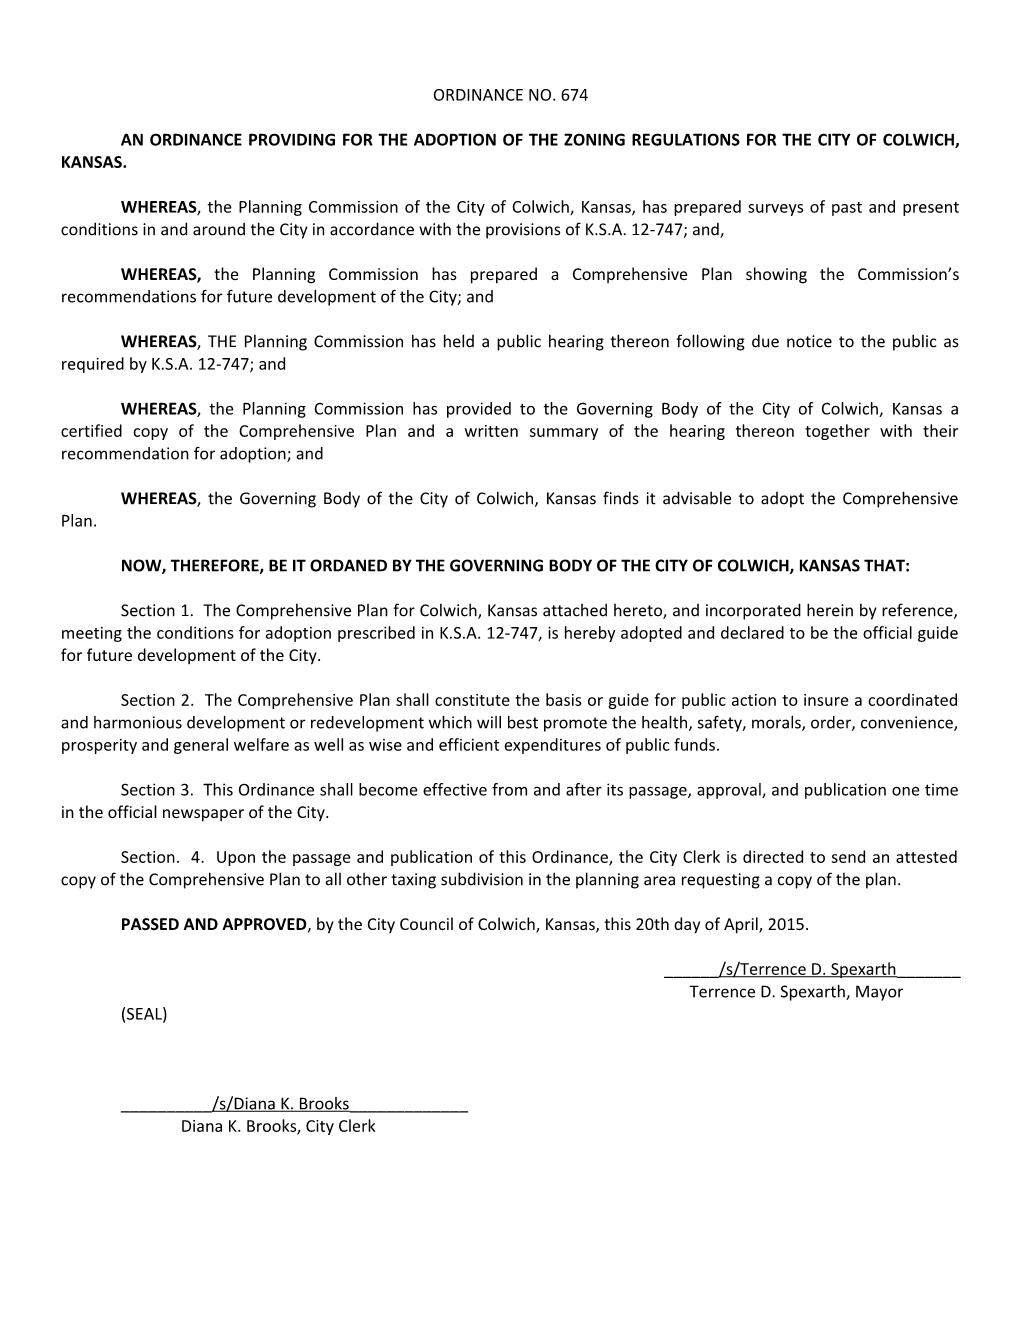 An Ordinance Providing for the Adoption of the Zoning Regulations for the City of Colwich